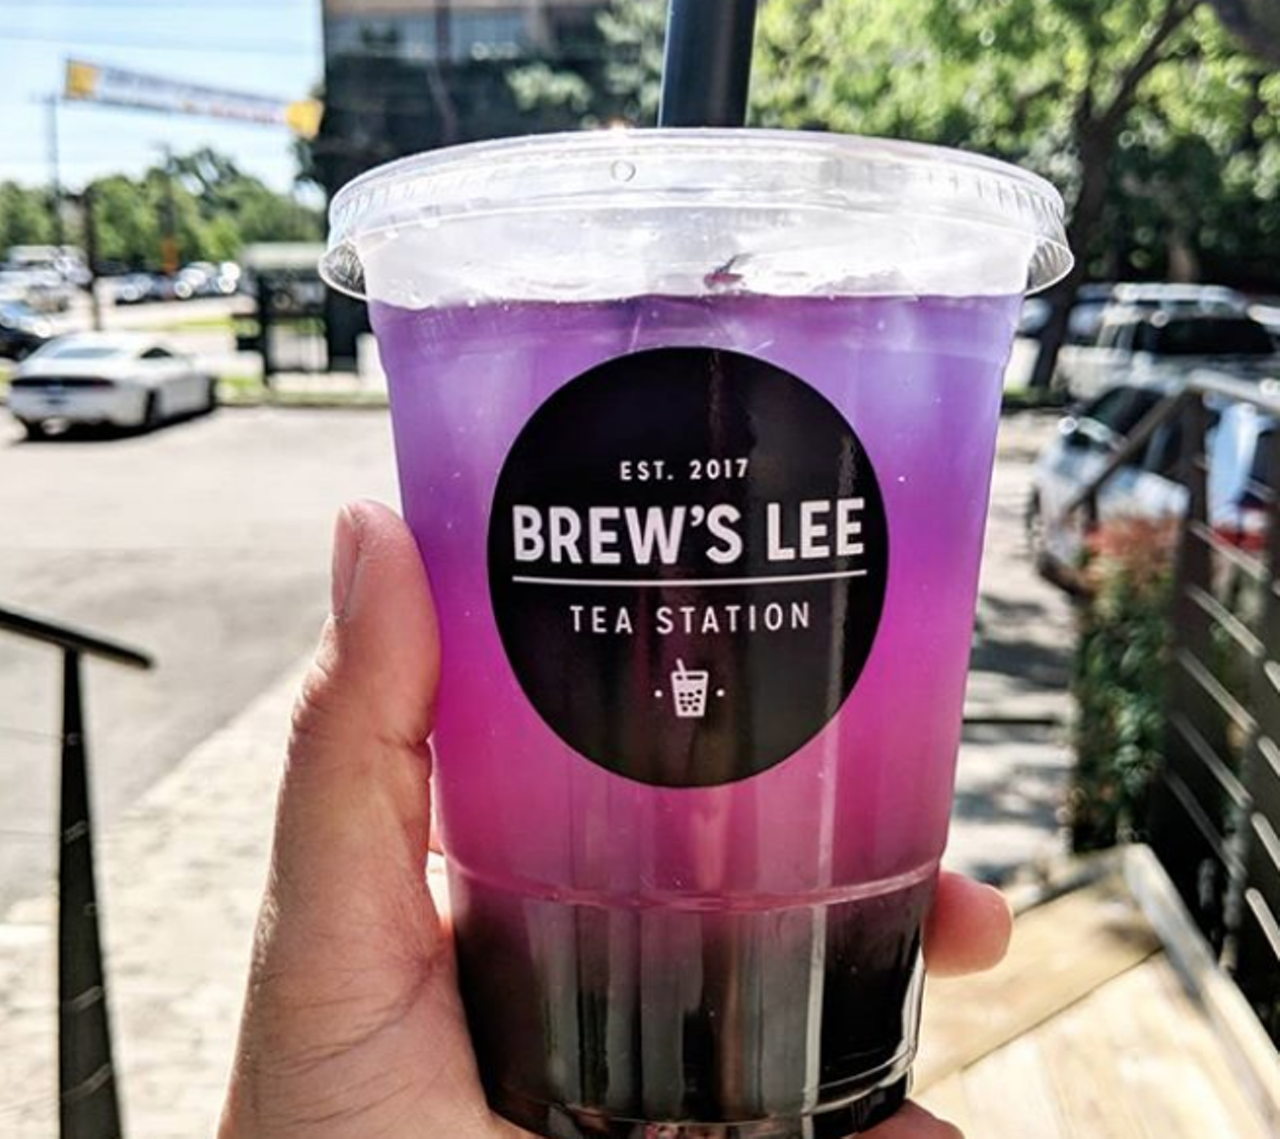 Brew’s Lee
4009 Broadway St, (210) 598-0068, brewsleetea.com
A passionate baker, illustrator and designer, Frances Lee is also the mother of one while leading one of SA’s most popular boba tea joints. 
Photo via Instagram / fuwafuwafoodie